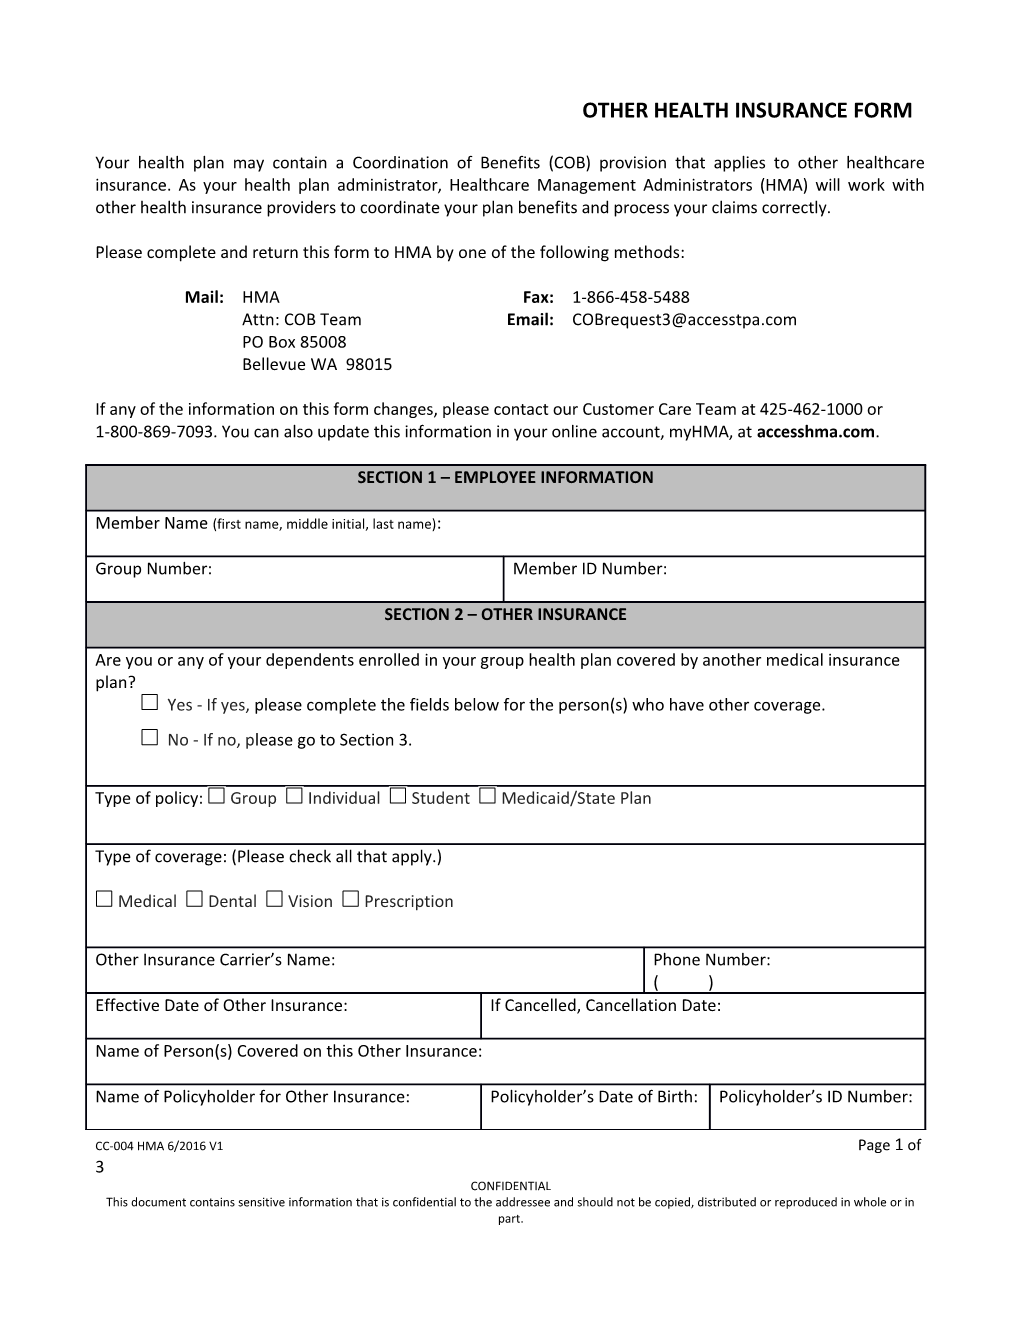 Other Health Insurance Form